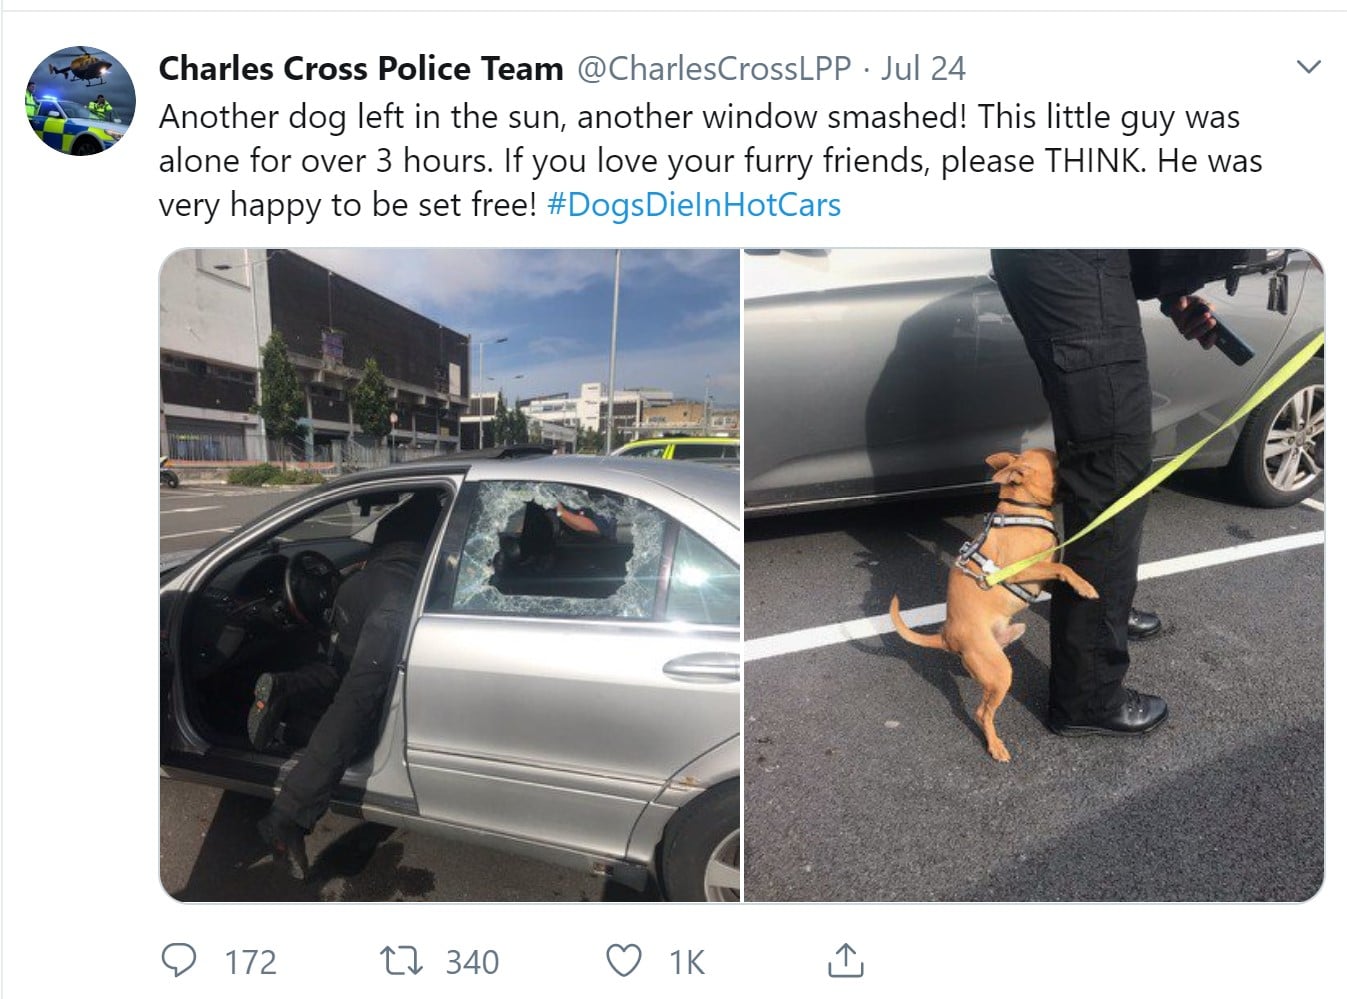 Charles Cross Police Tweet About Dog Rescue